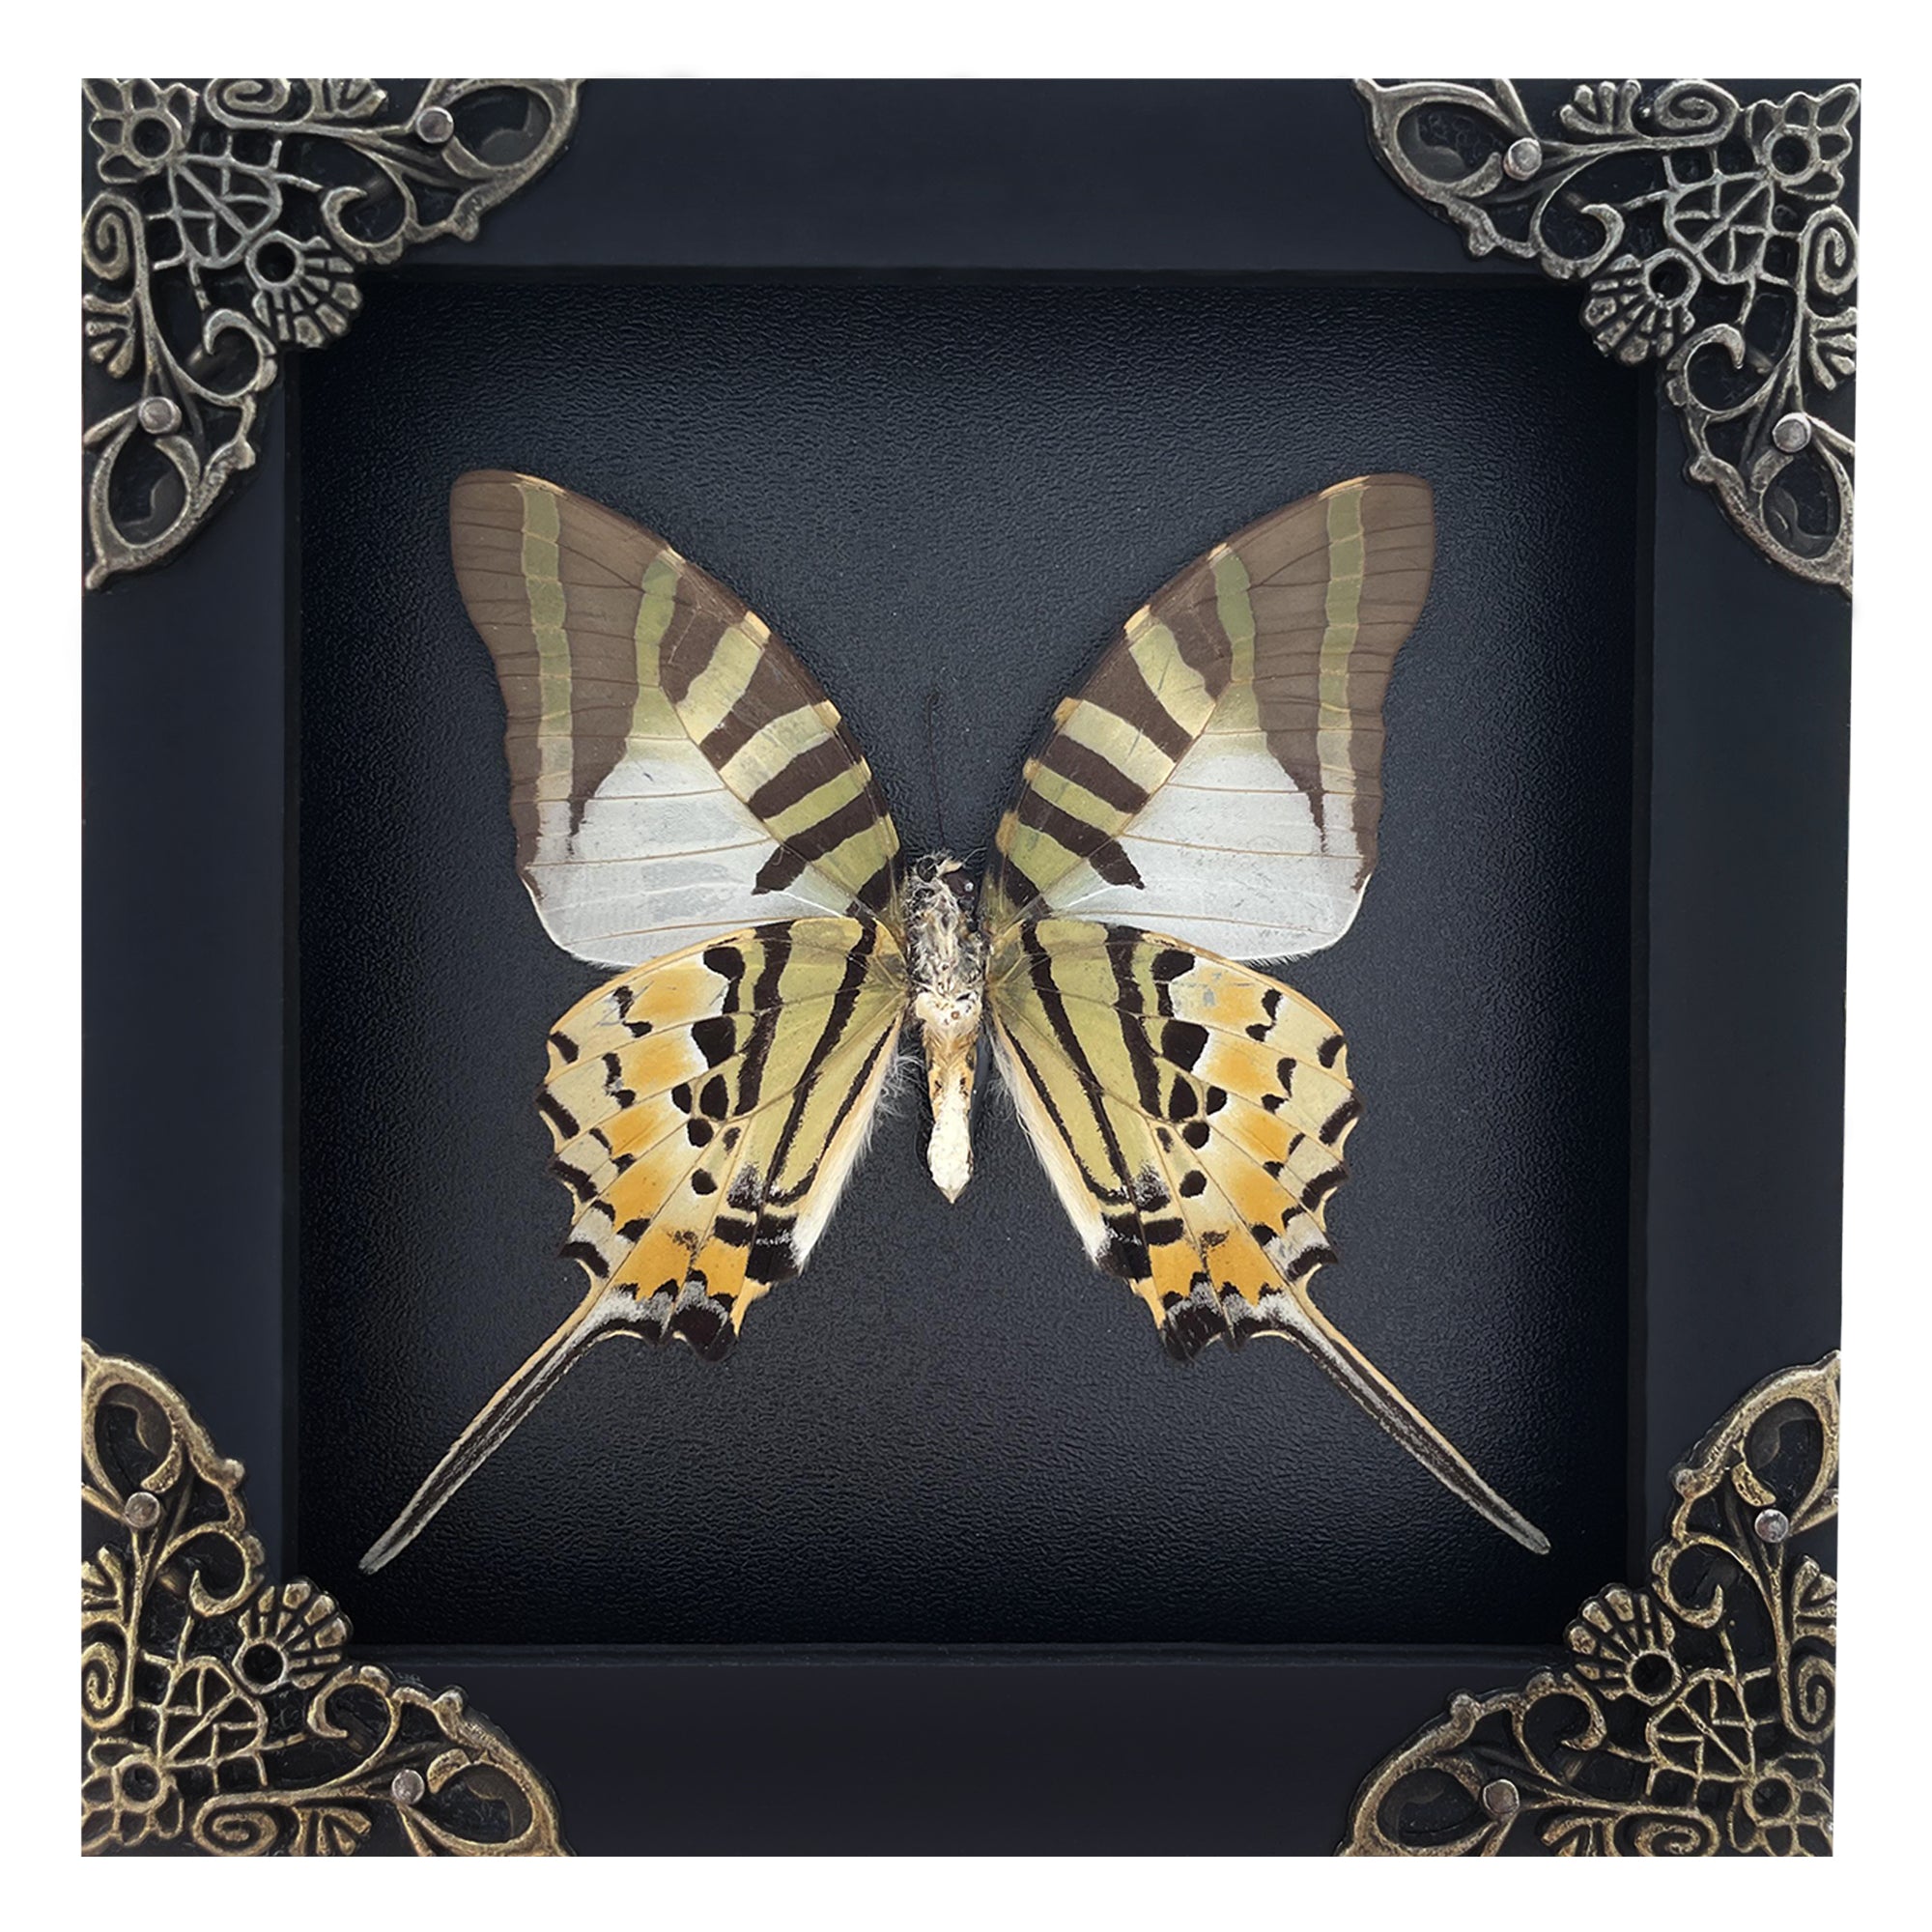 Real Five-bar Swordtail Framed Butterfly Handmade Shadow Box Display Collection Insect Taxidermy Specimen Decor Living Home Reading Gallery K14-41-DE